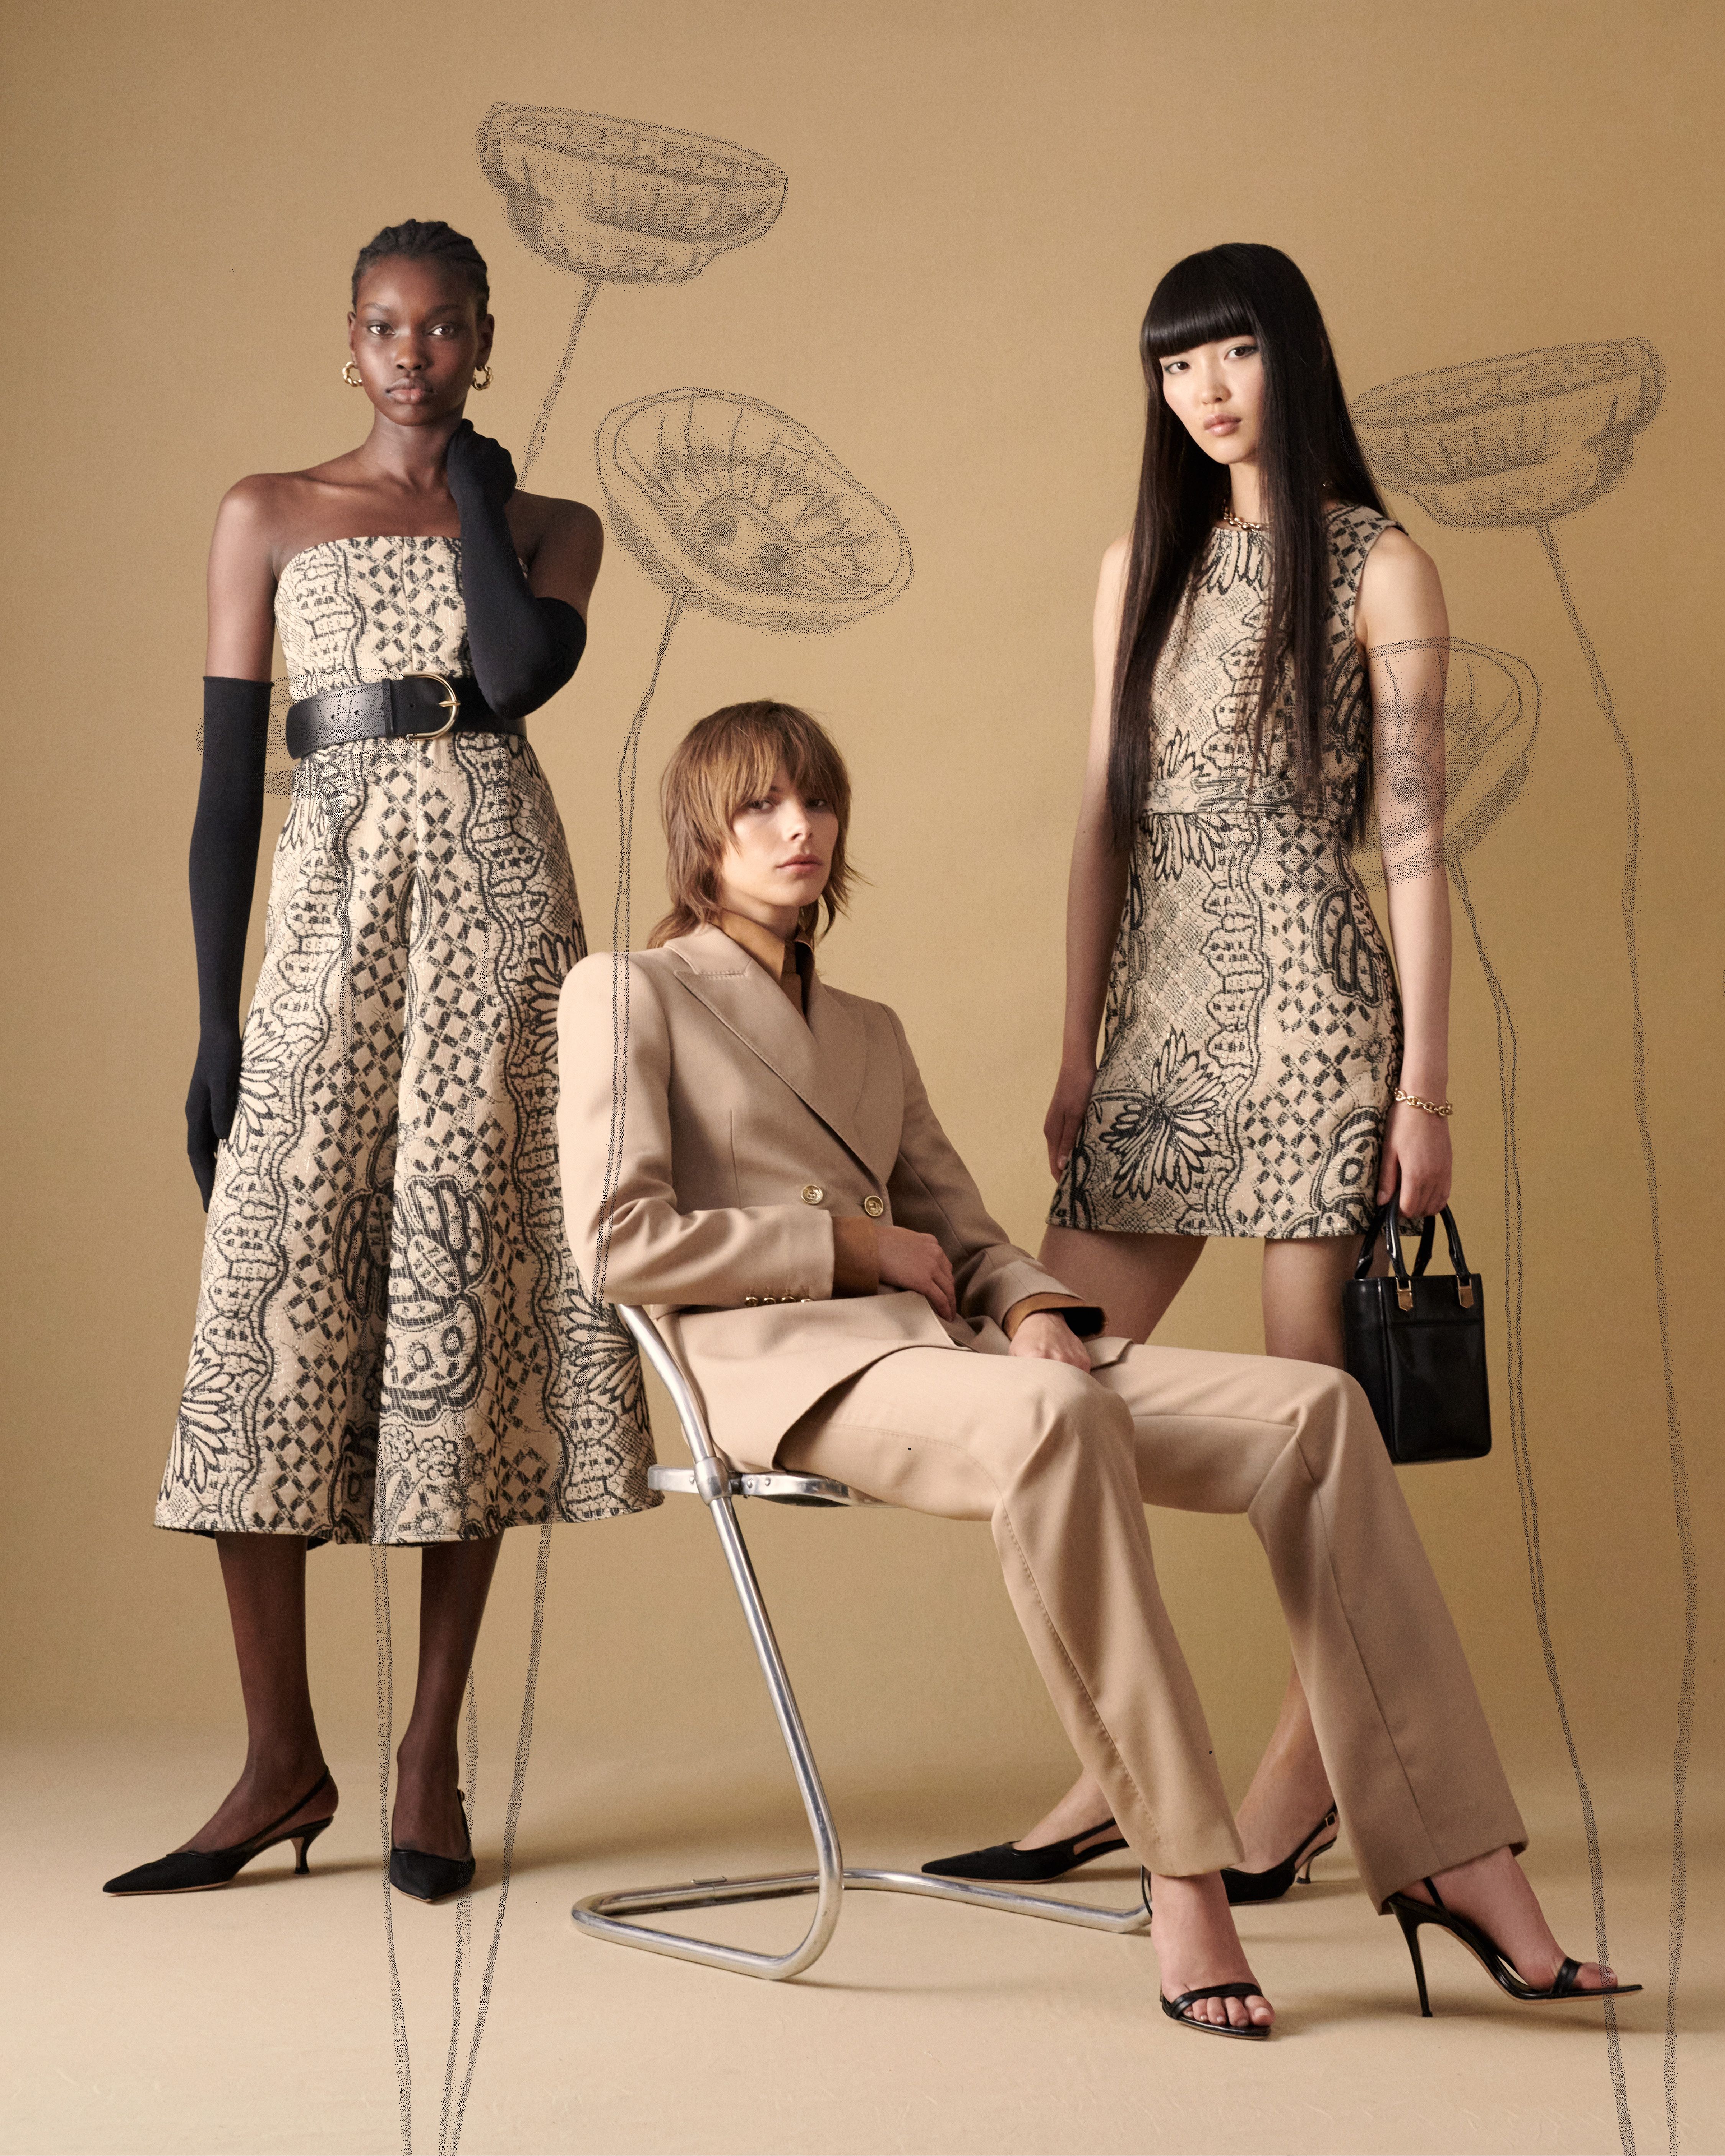 Three models posing wearing formal wear in tones of black and beige with black poppy illustrations overlaid on top